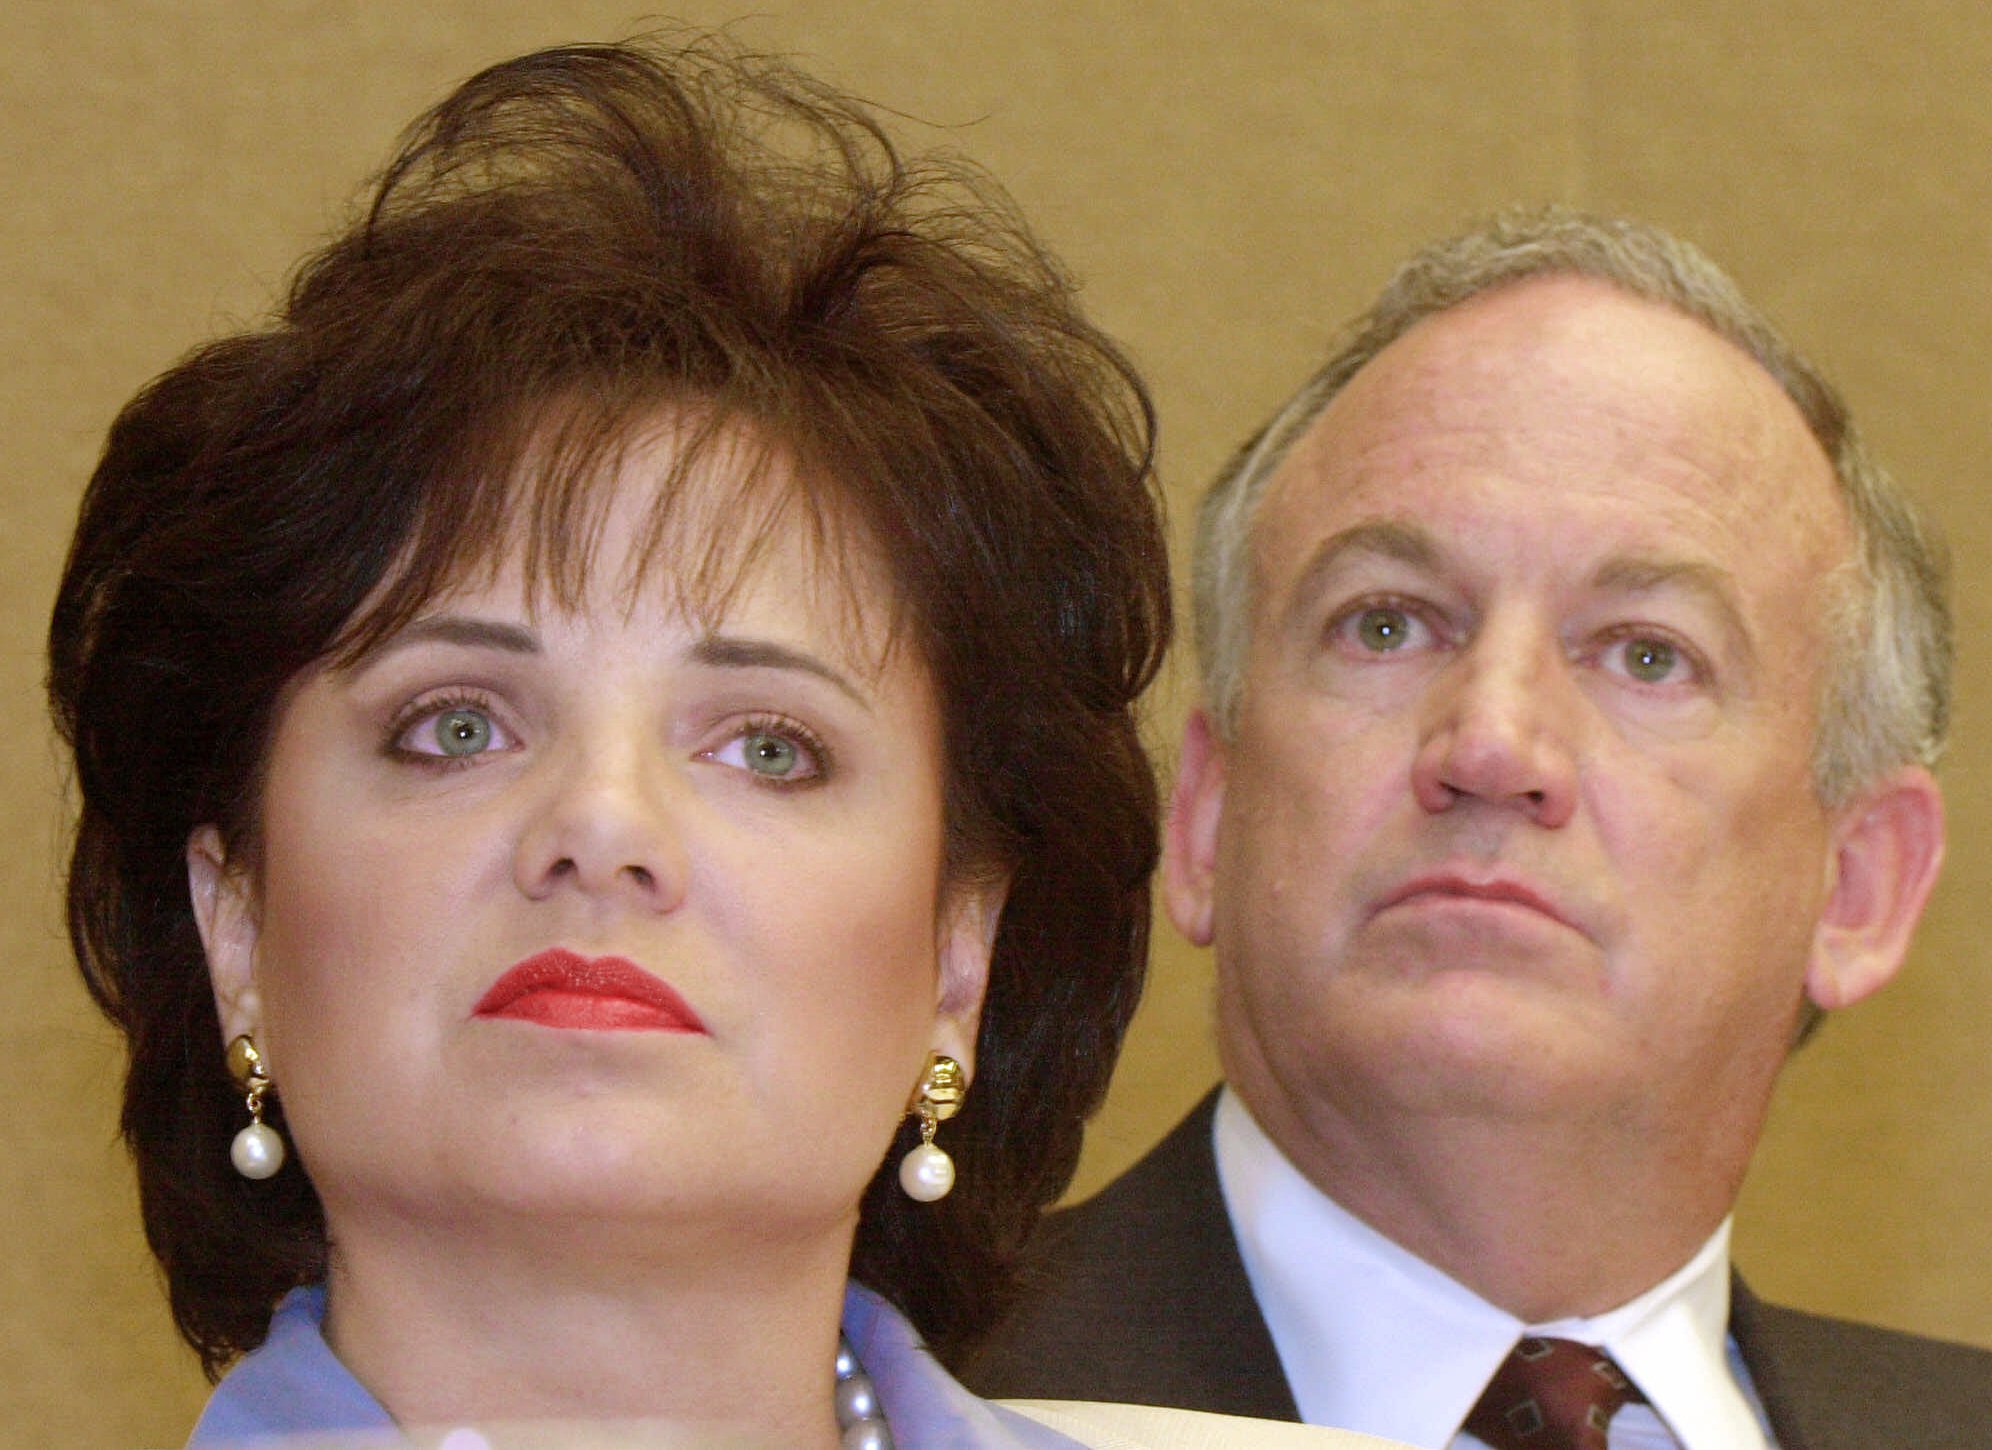 In this May 24, 2000 file photo, Patsy Ramsey and her husband, John, parents of JonBenet Ramsey, look on during a nws conference in Atlanta regarding their lie-detector examinations for the murder of their daughter.